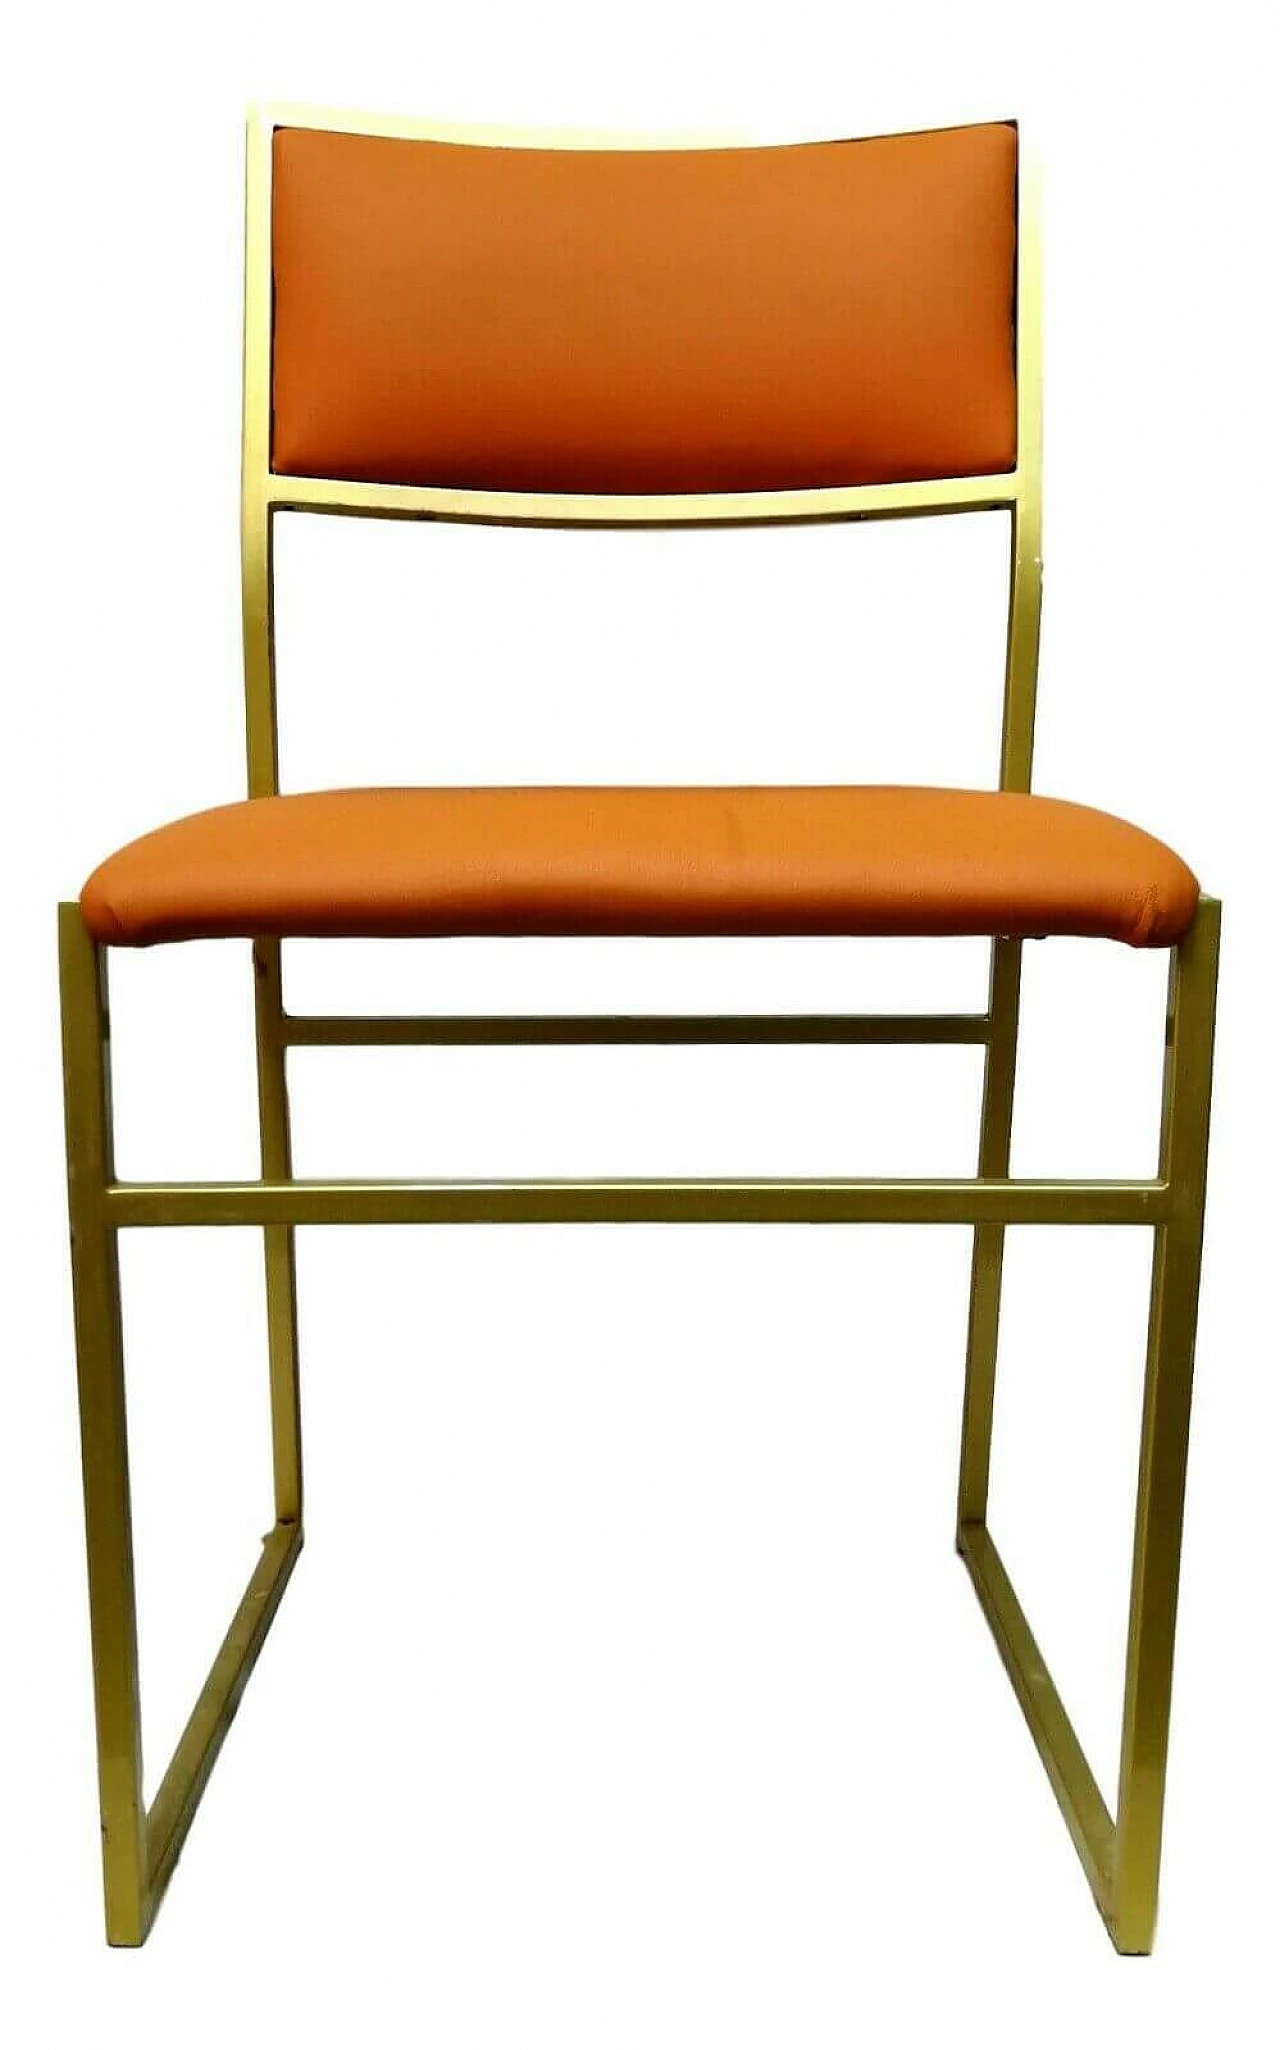 Metal chair and apricot-colored seat, 70s 1166229